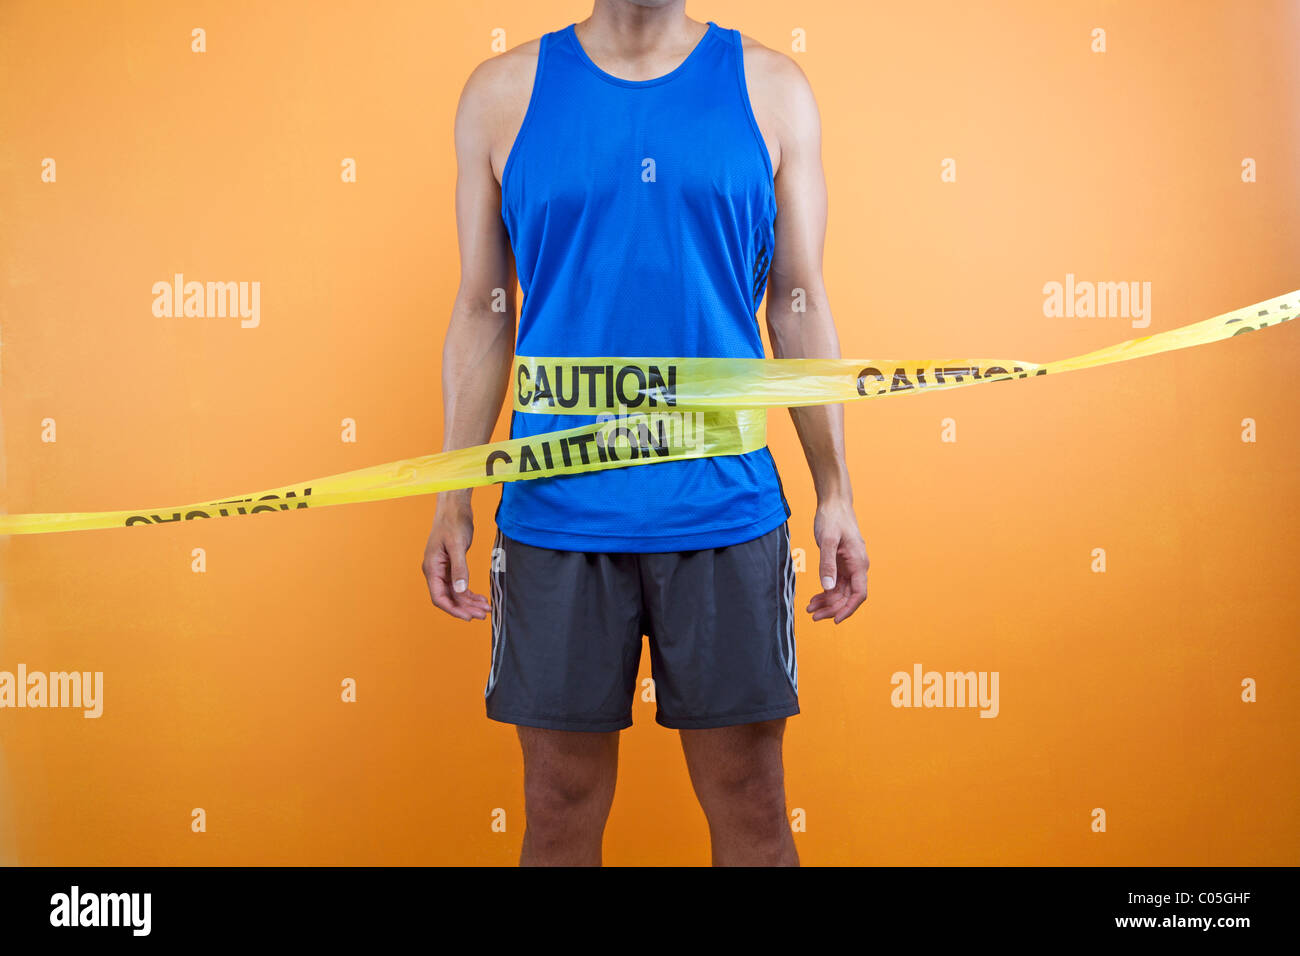 runner with caution tape wrapped around waist Stock Photo